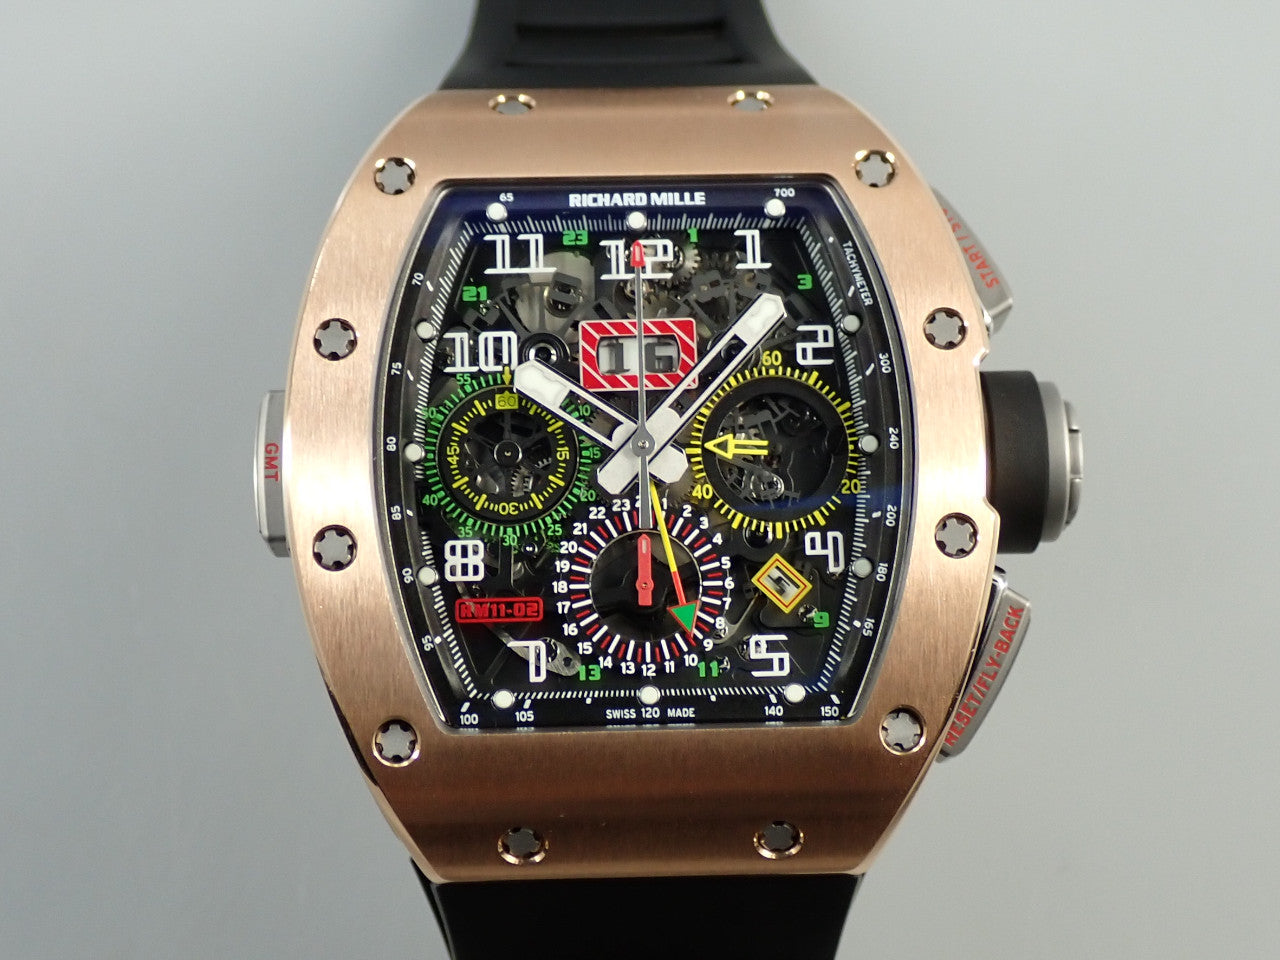 Richard Mille Automatic Flyback Chronograph Dual Time Zone &lt;Warranty, Box, etc.&gt;